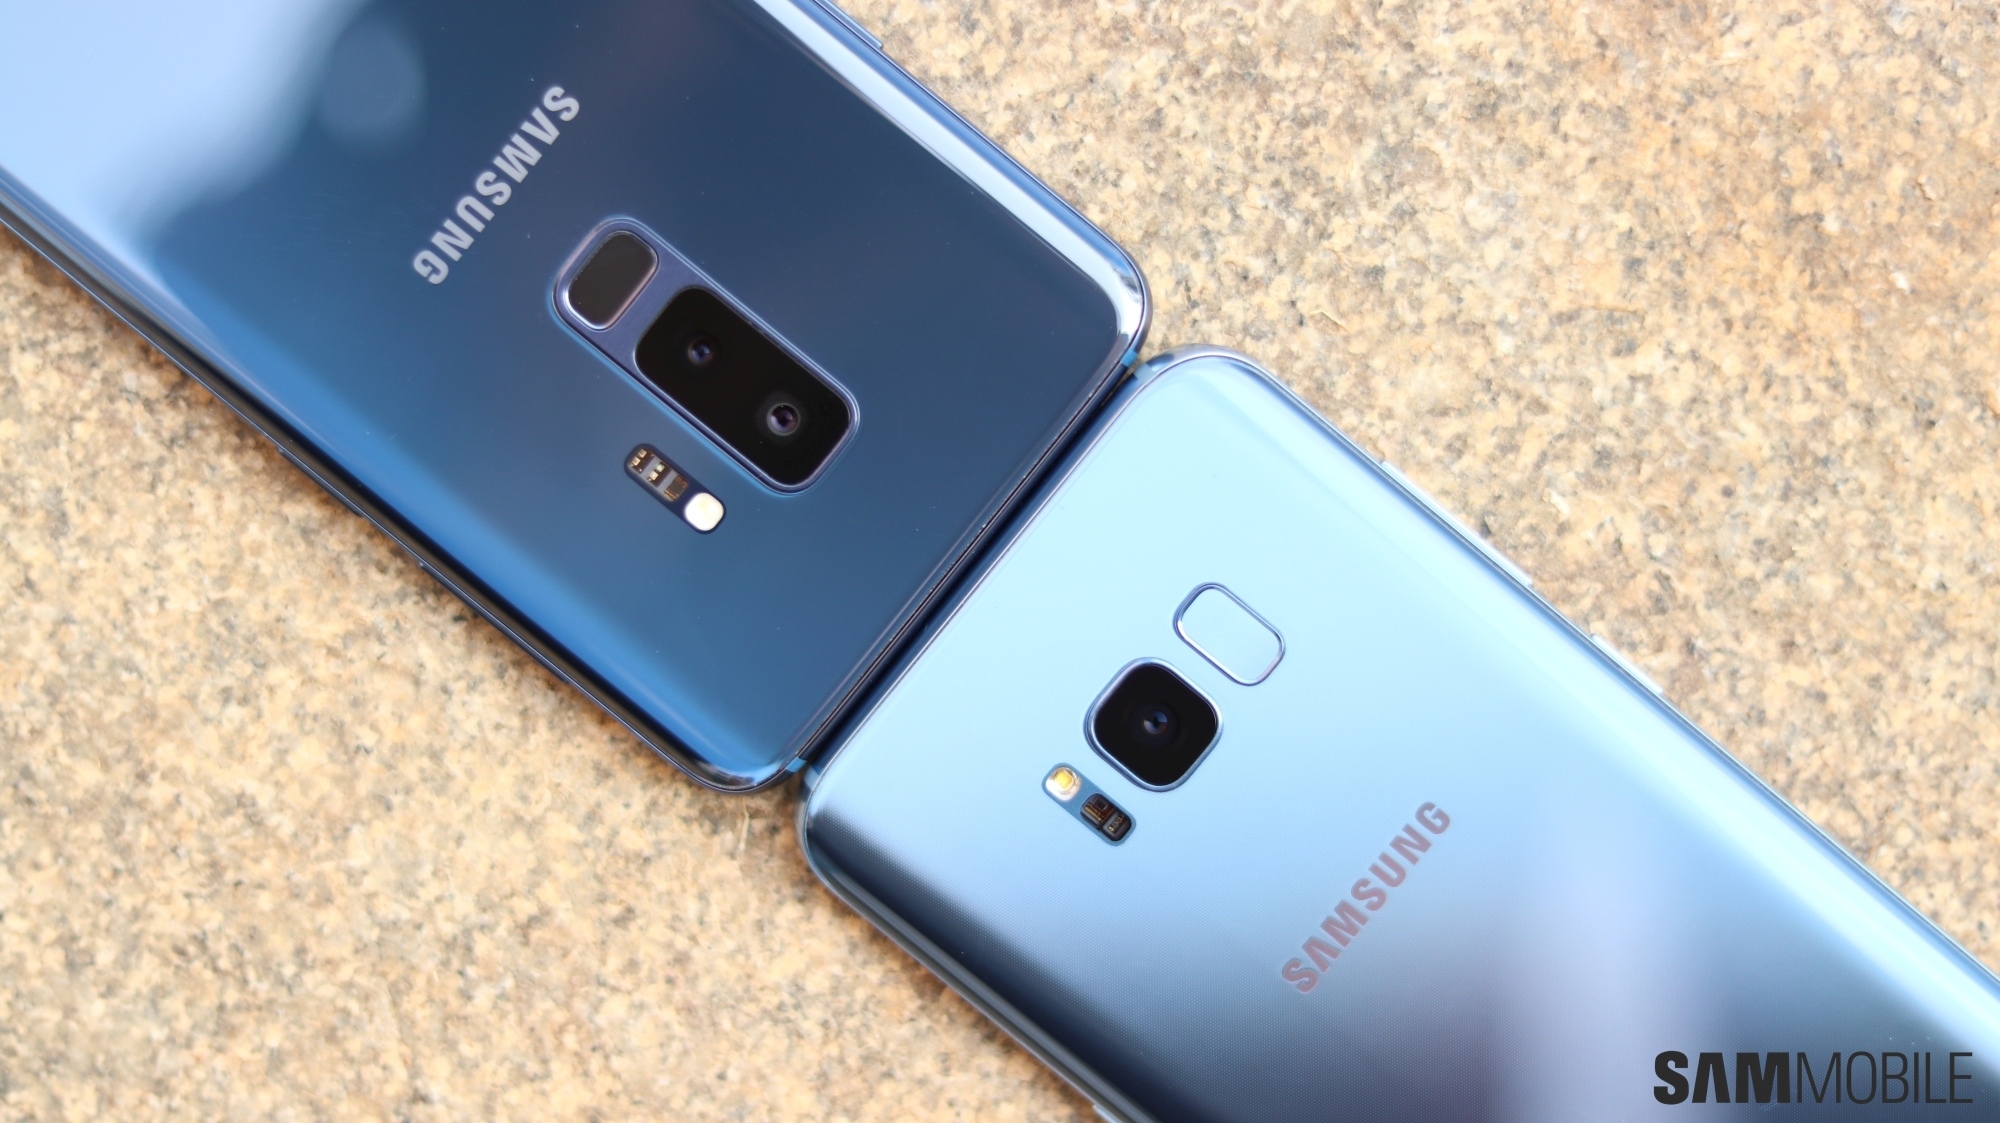 Samsung Galaxy S9 Vs Galaxy S8 Side By Side Pictures Sammobile